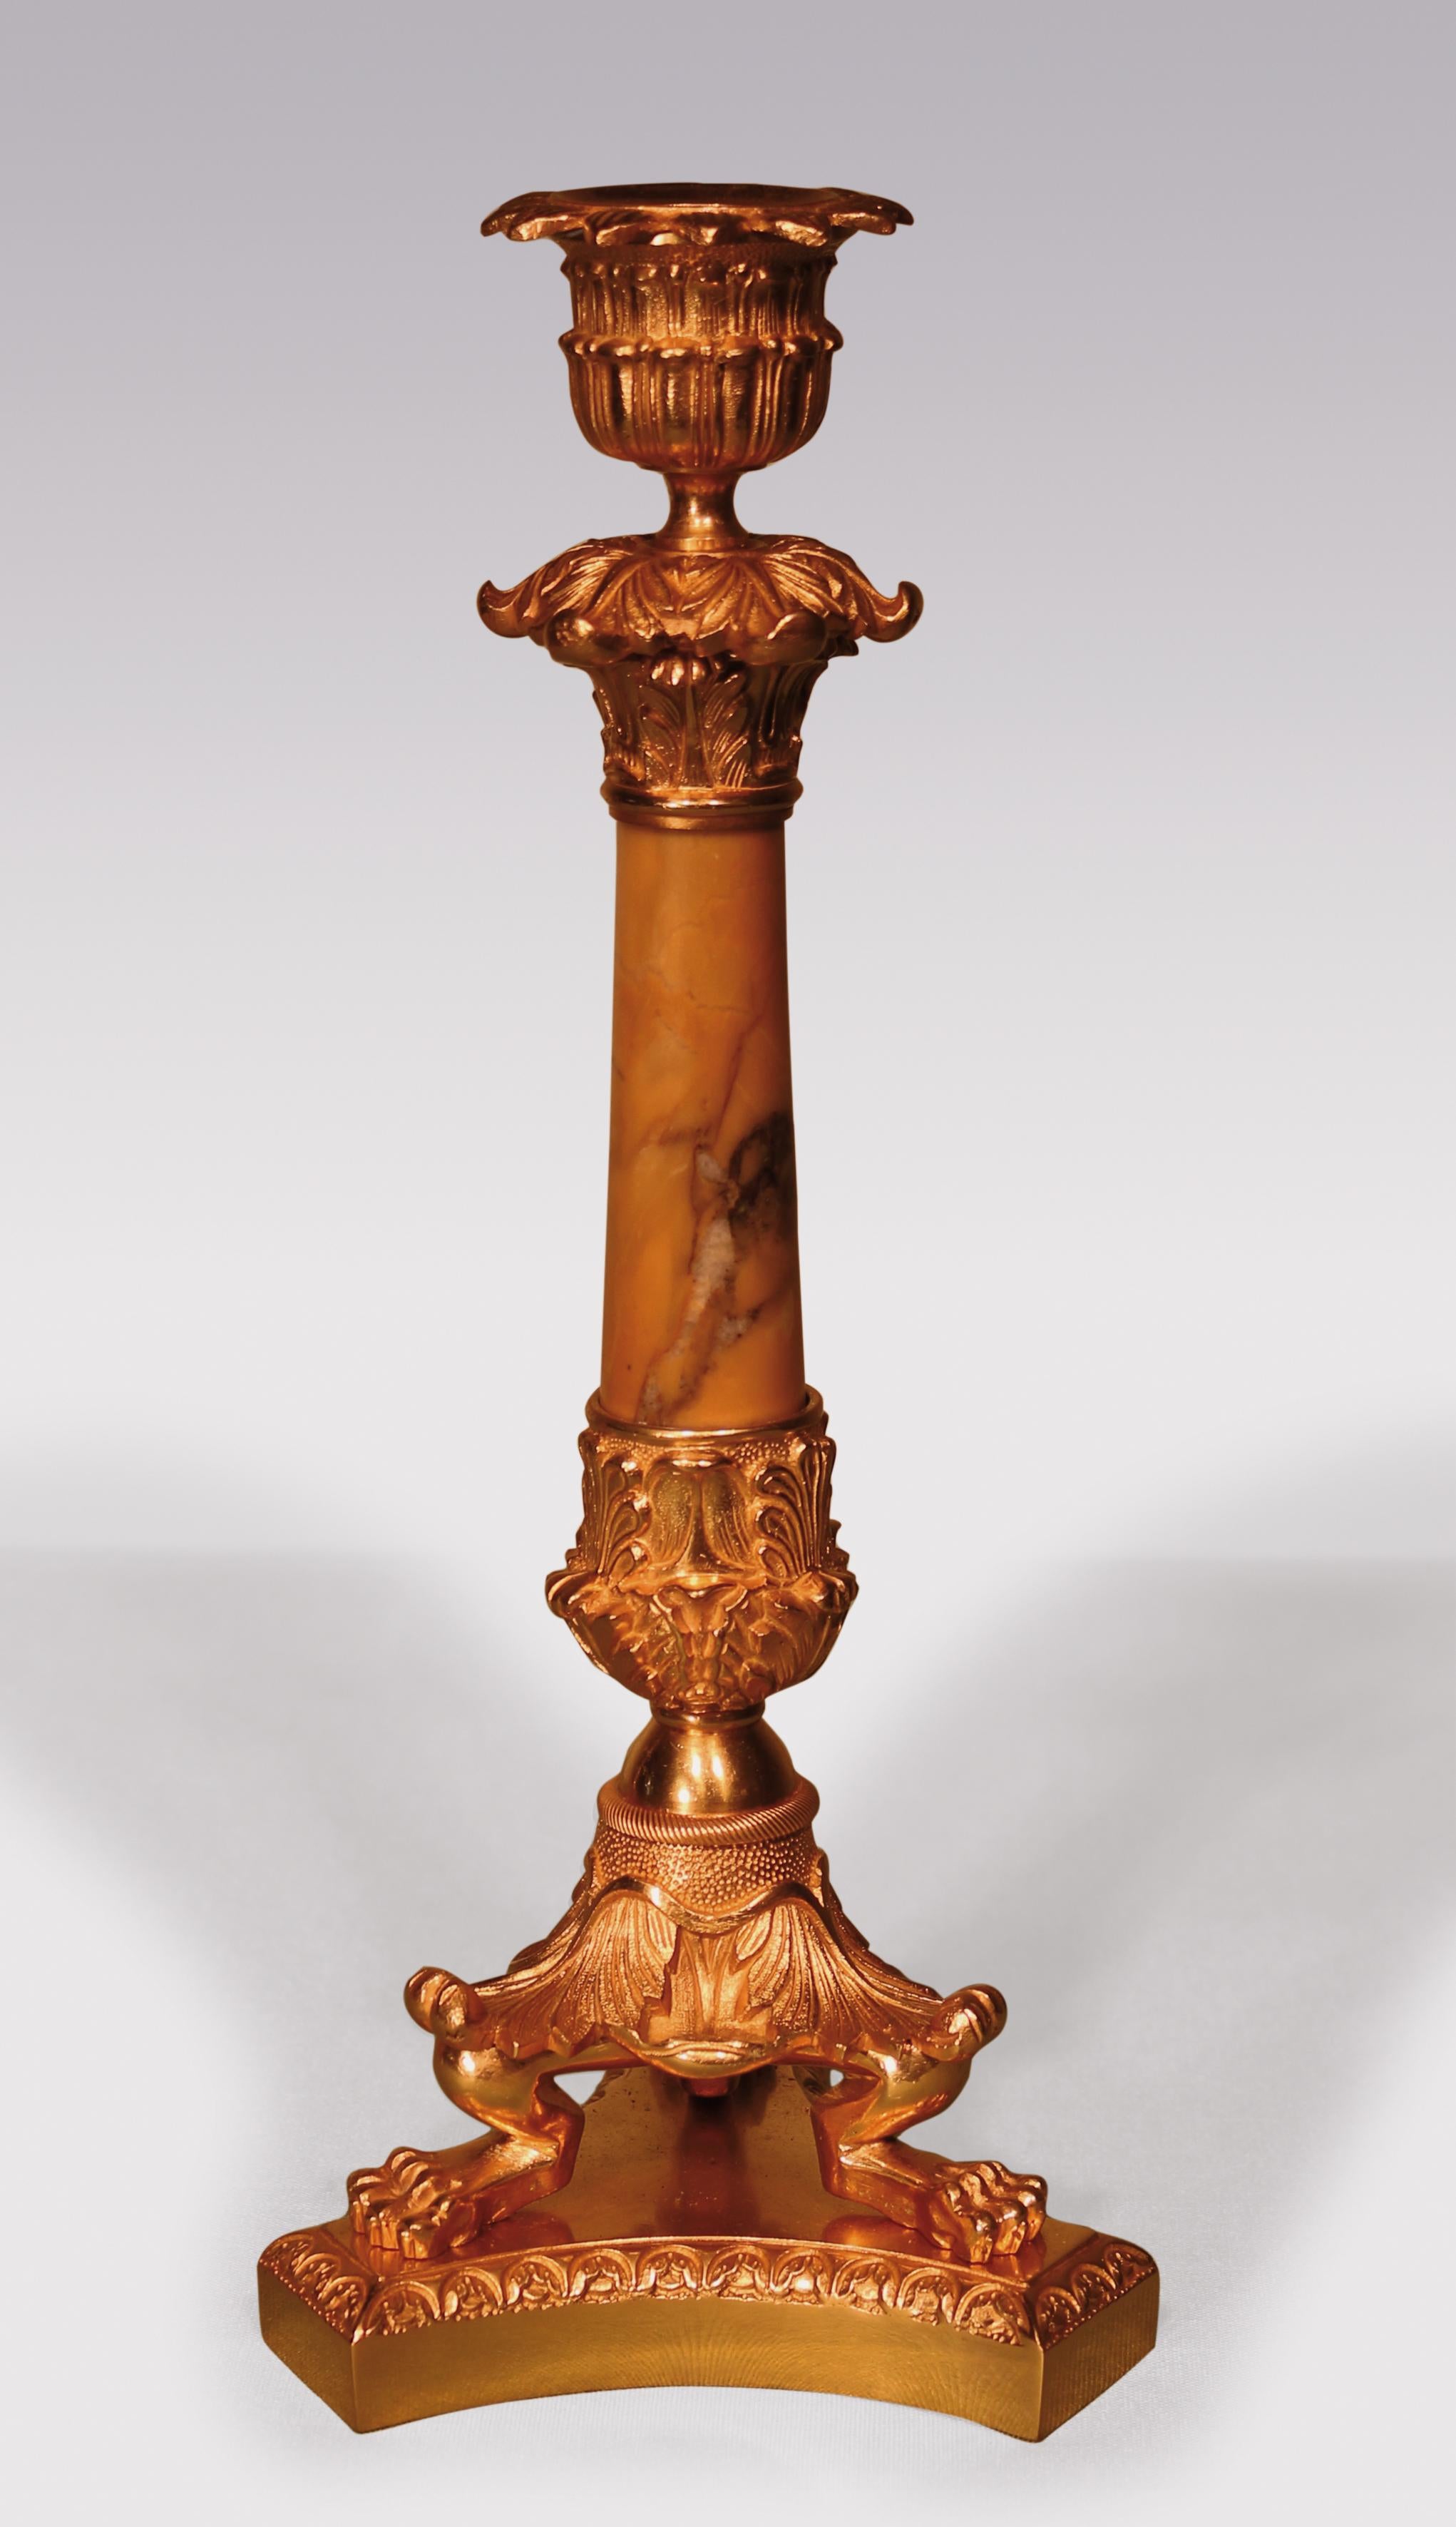 A pair of early 19th Century ormolu Candlesticks, having double leaf decorated sconces above tapering Sienna marble stems raised on acanthus leaf & lion’s paw triform feet ending on concave bases.